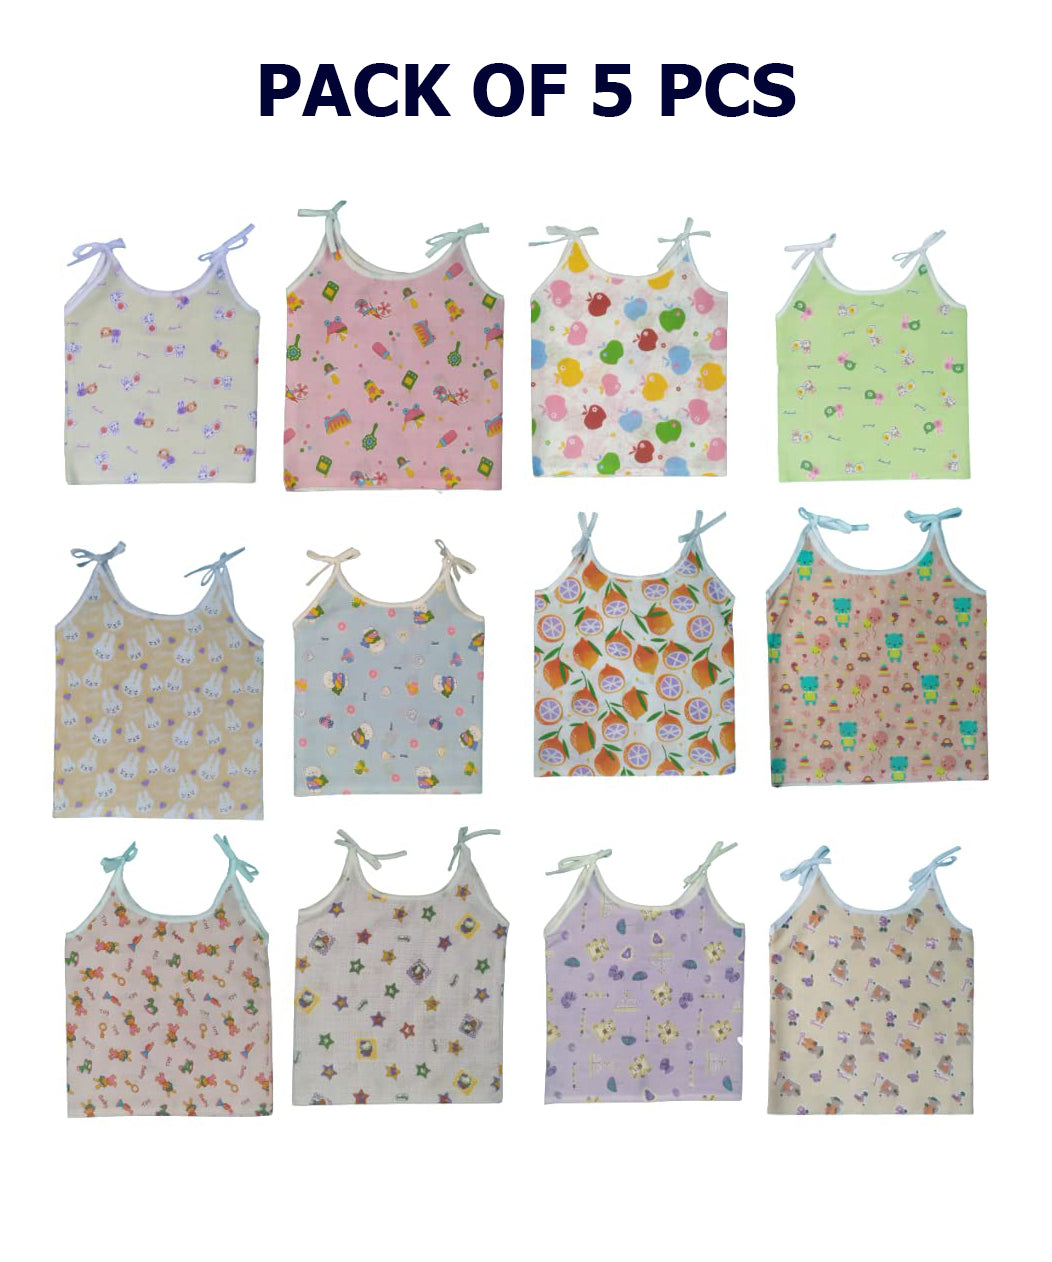 New Born Baby Top Knot Type Dress / New Born Gift (Pack of 5)